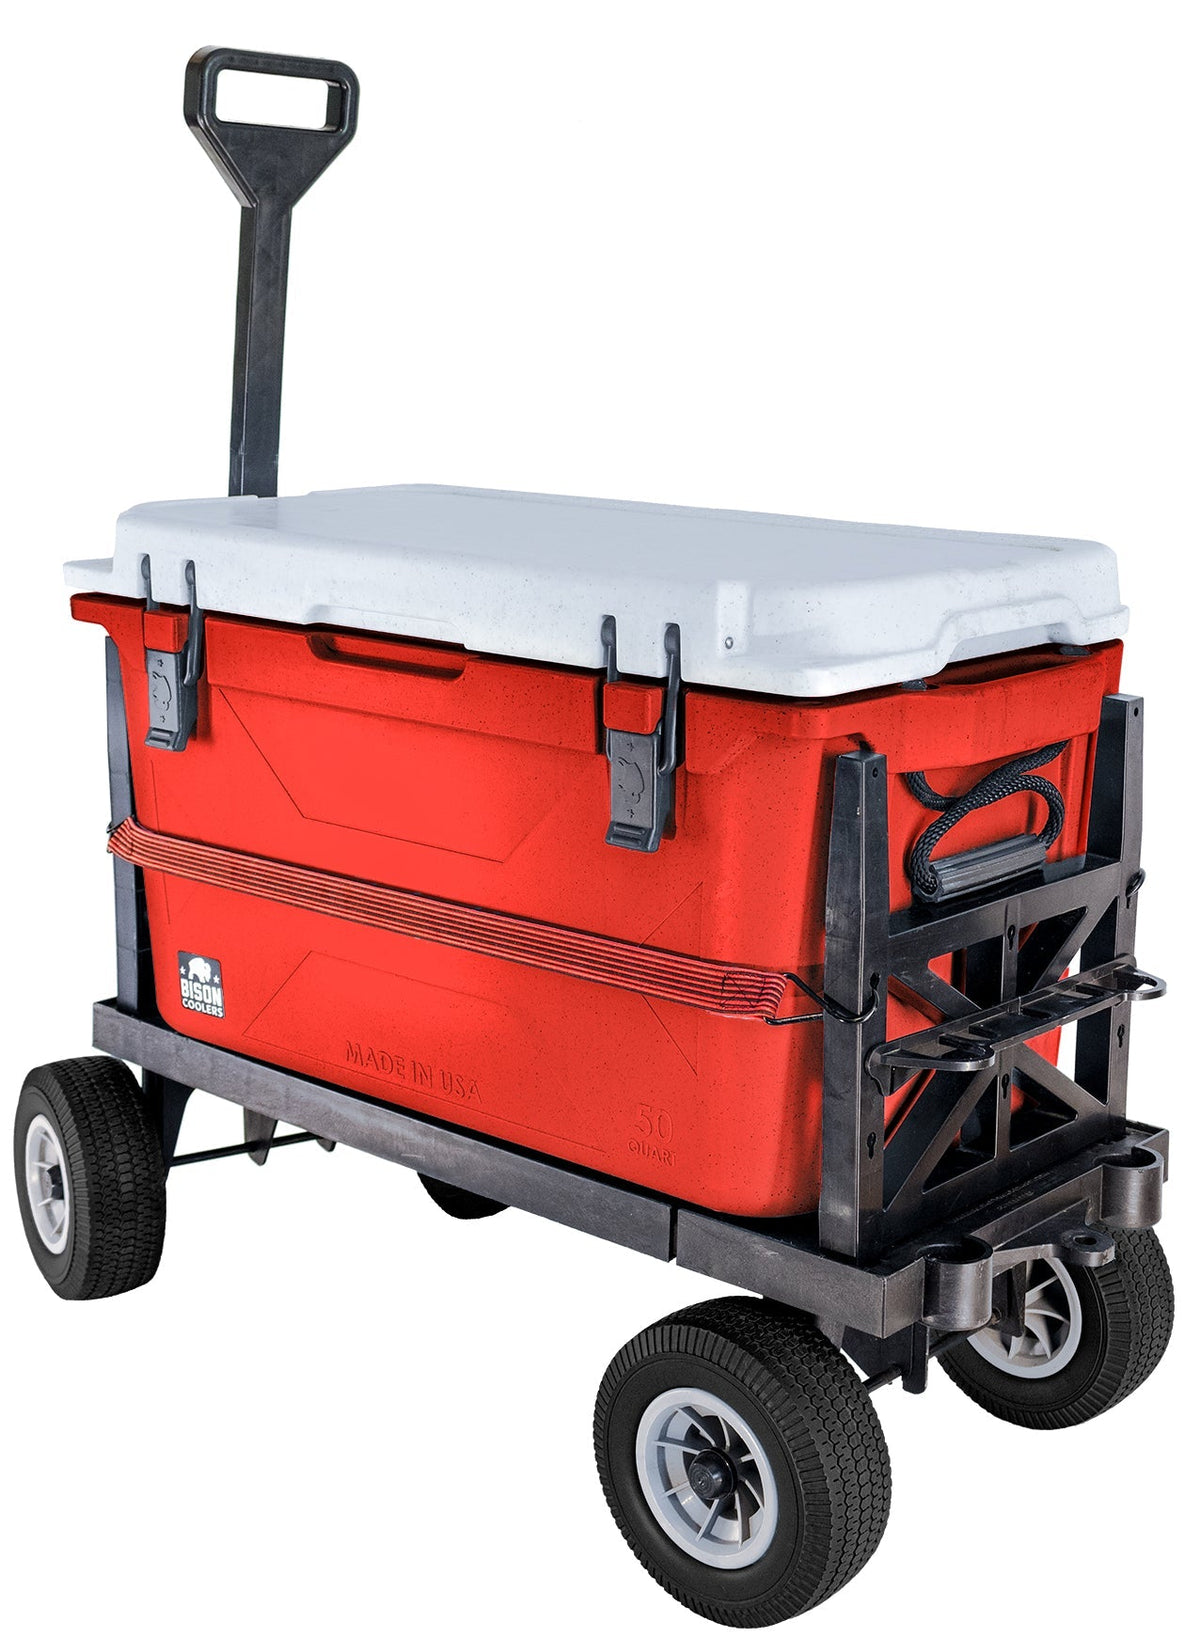 Mighty Max Cart Collapsible Outdoor Cooler Caddy and Fishing Cart New